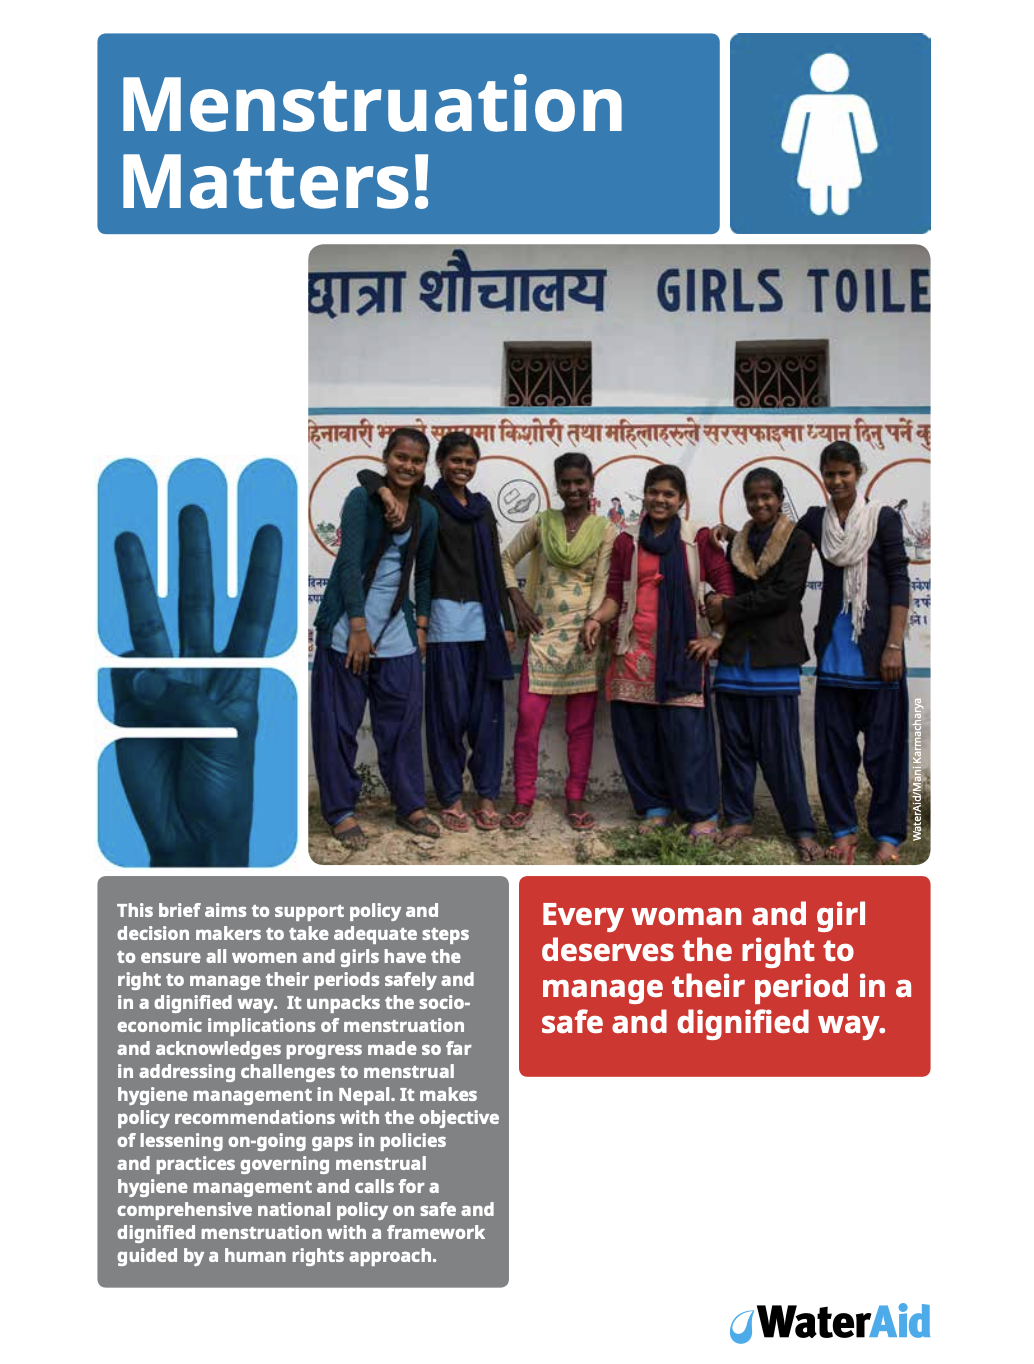 WaterAid’s Policy Brief on Menstruation Matters